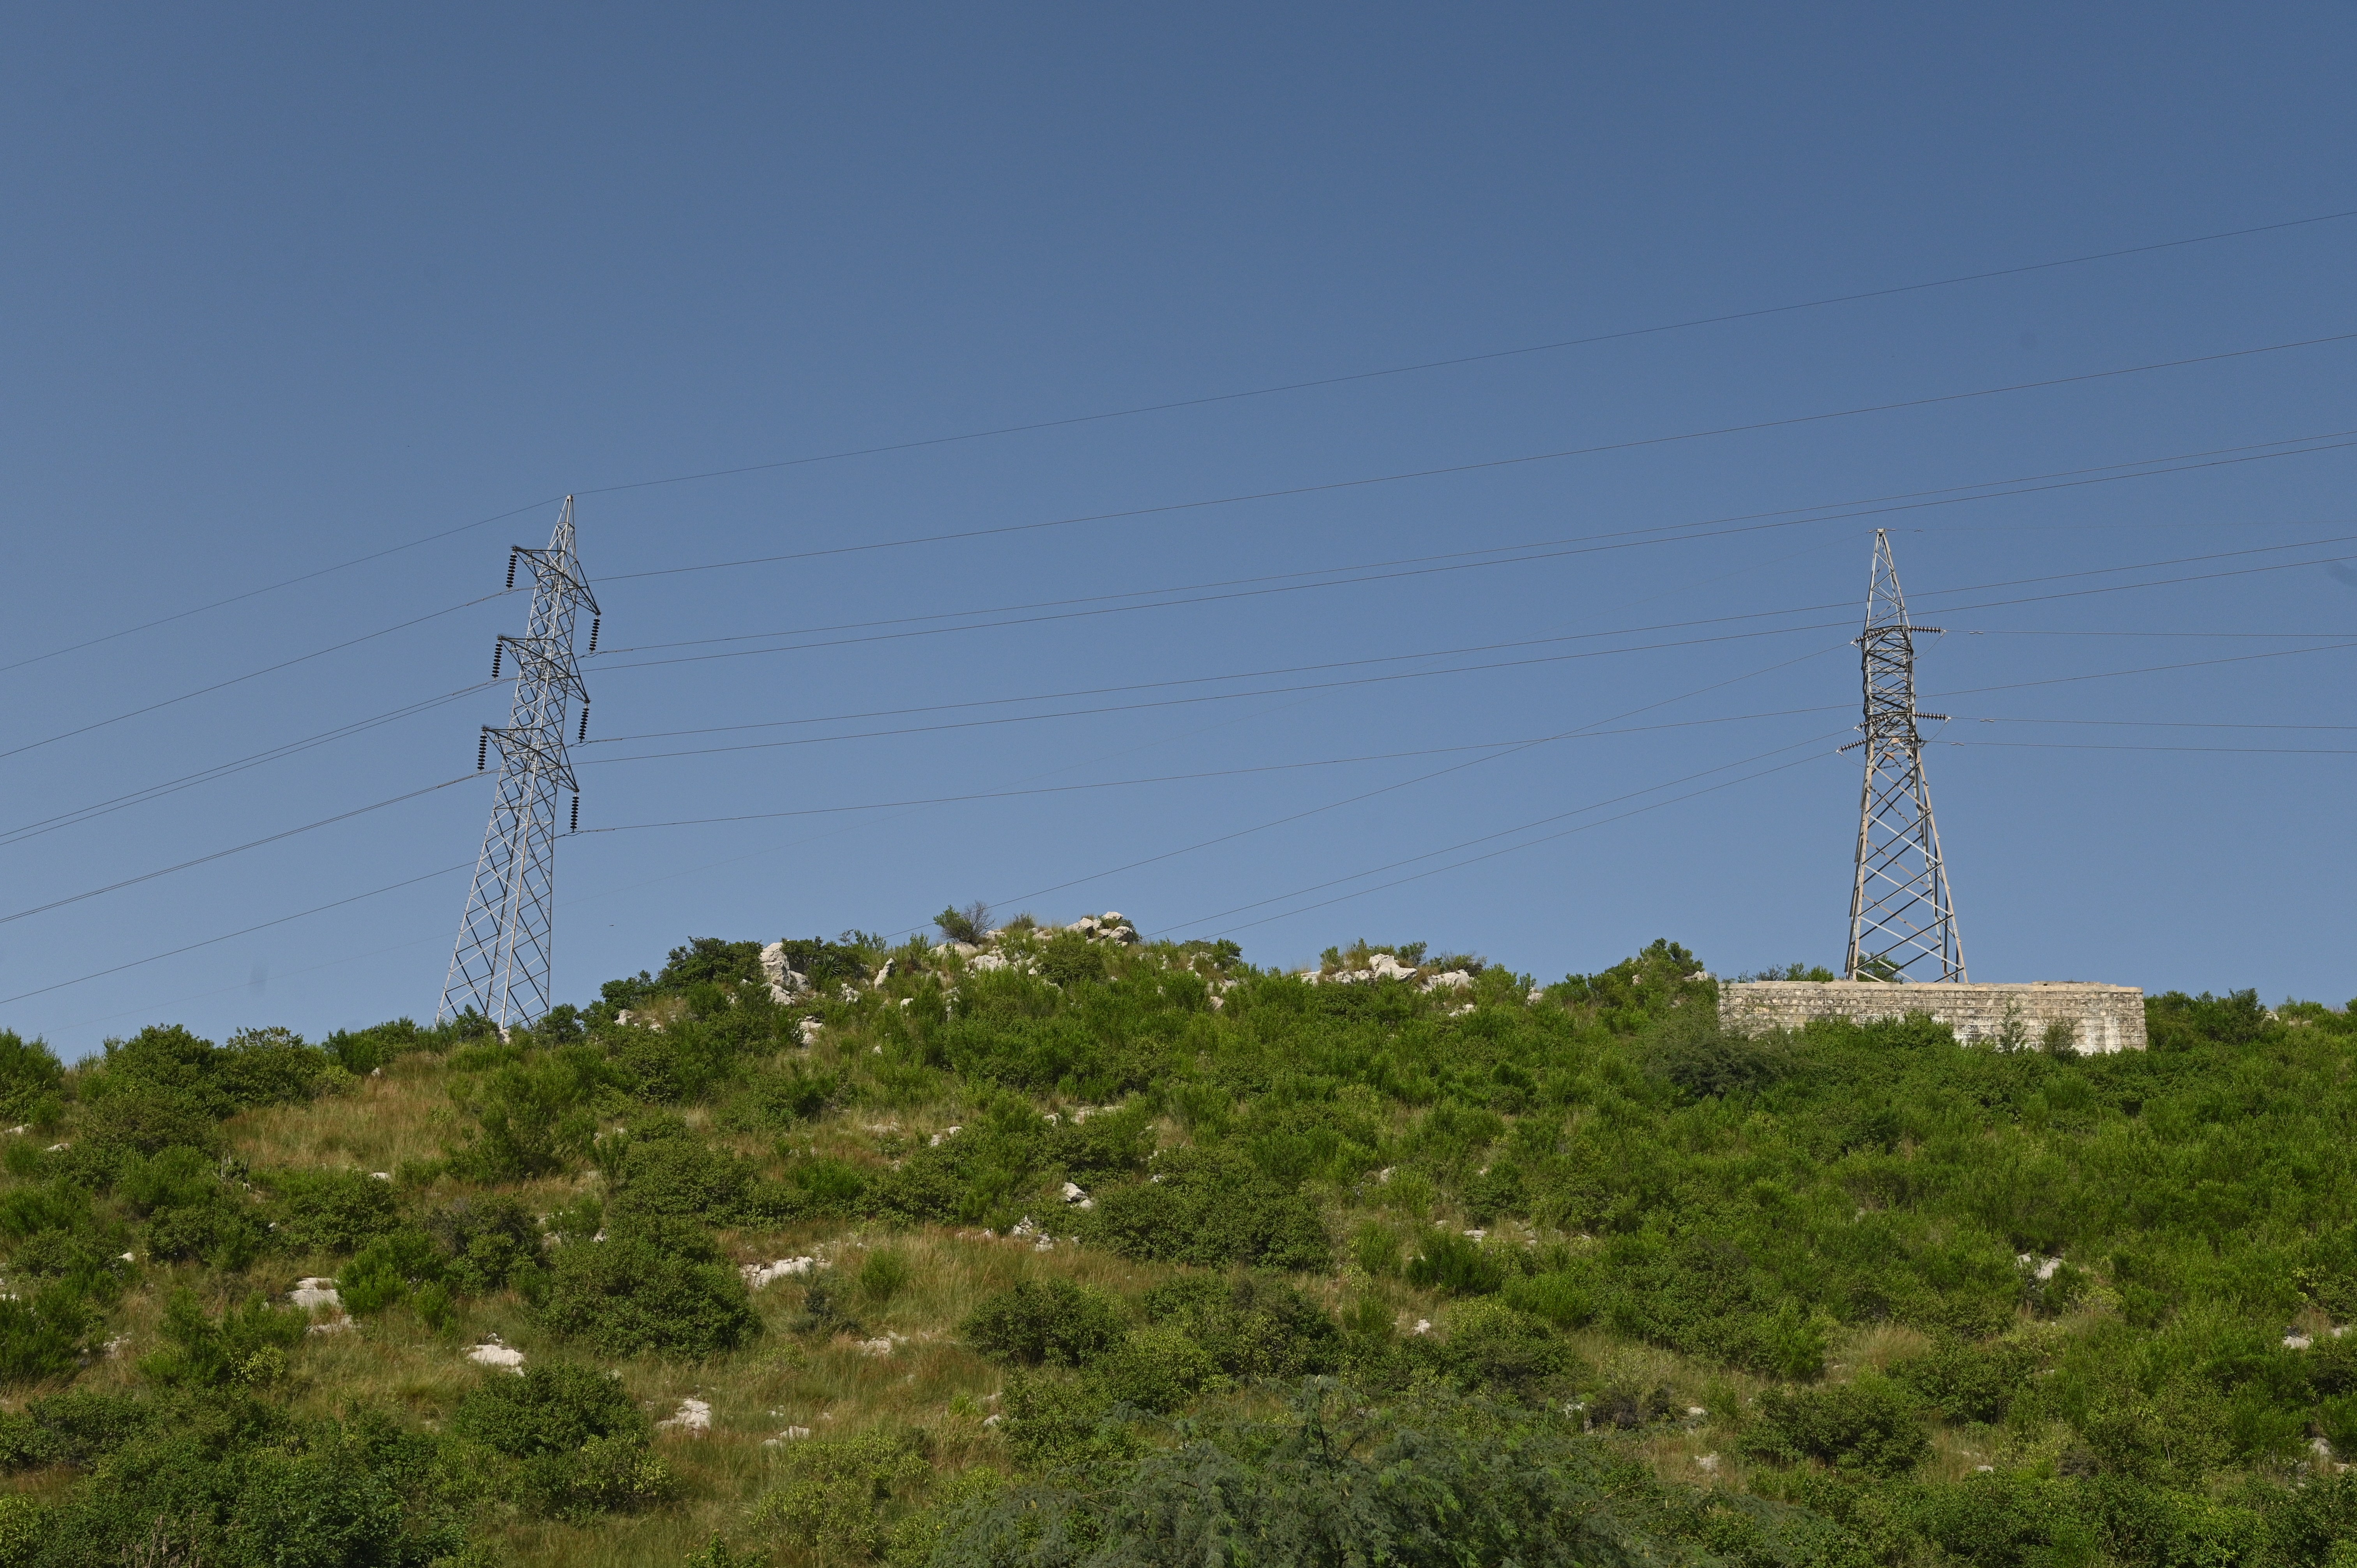 An overhead power line (a structure used in electric power transmission and distribution to transmit electrical energy along large distances)